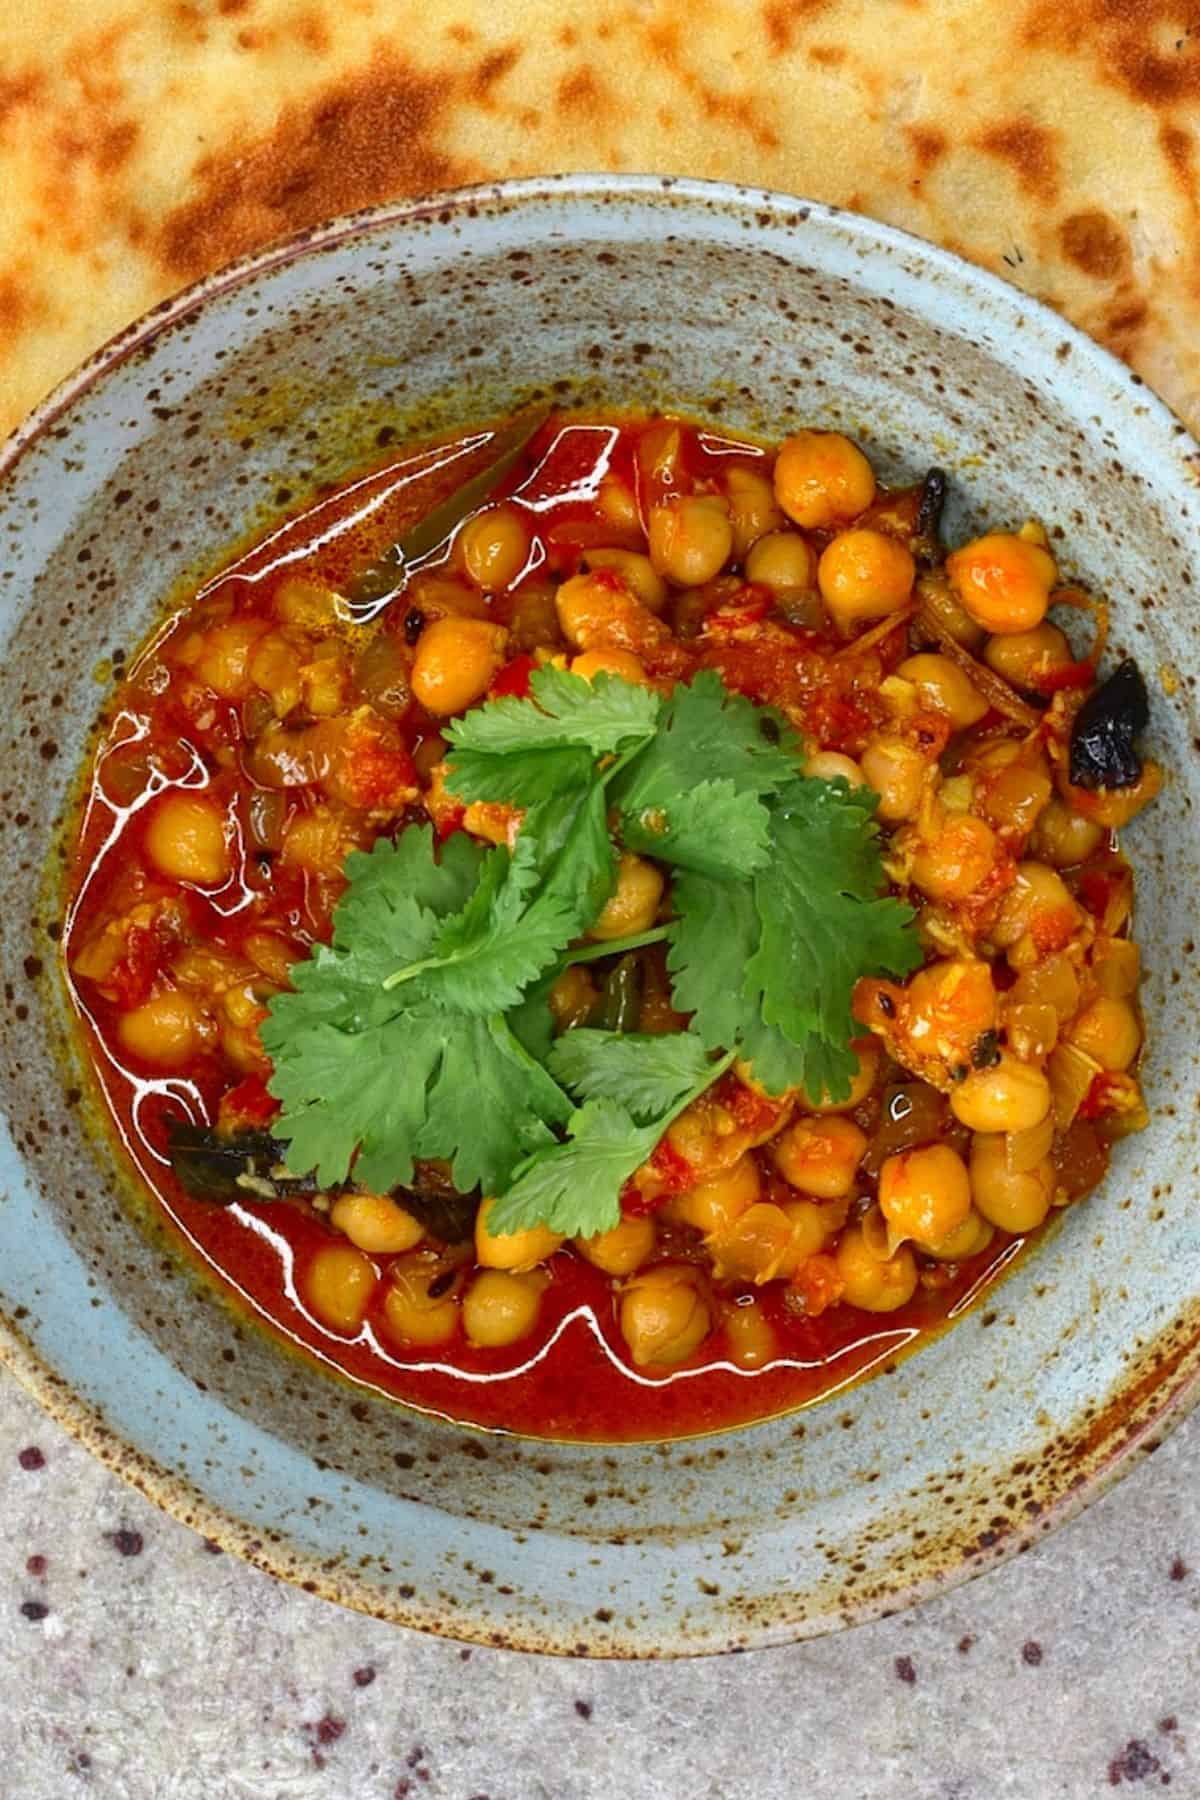 Chickpea curry and a naan bread